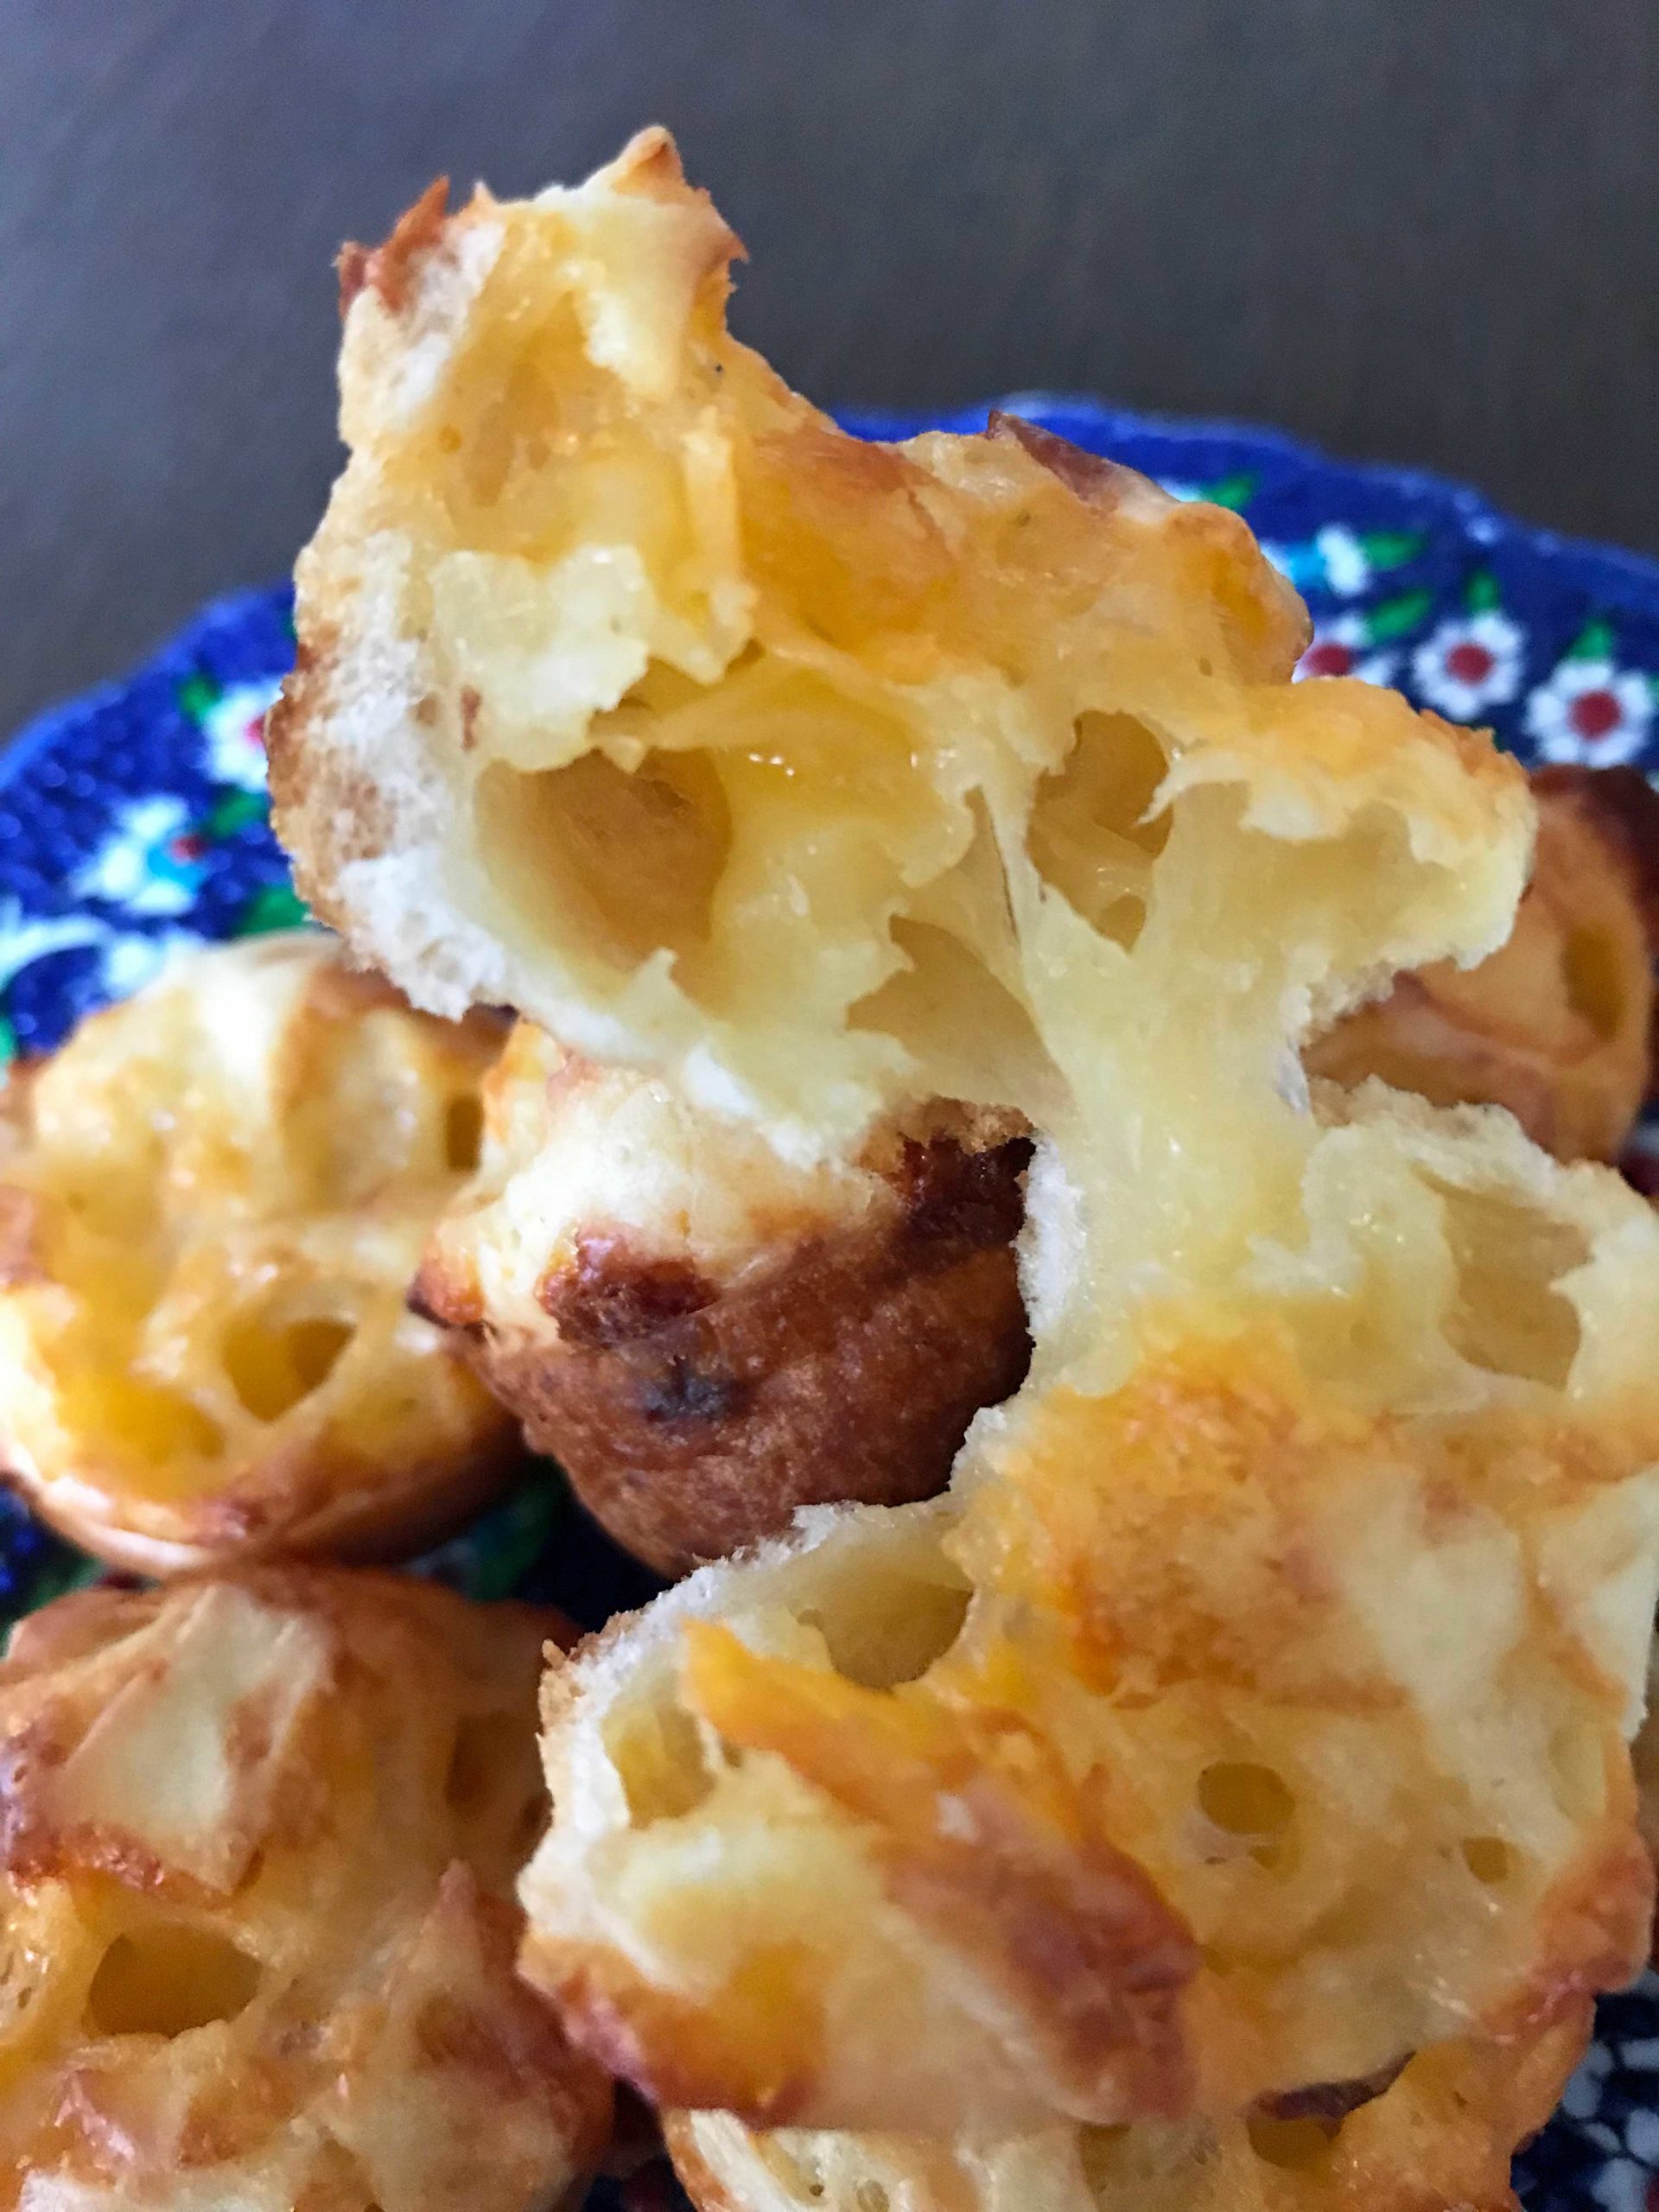 Gluten-Free Cheddar Cheese Breads inspired by Brazilian Cheese Bread.